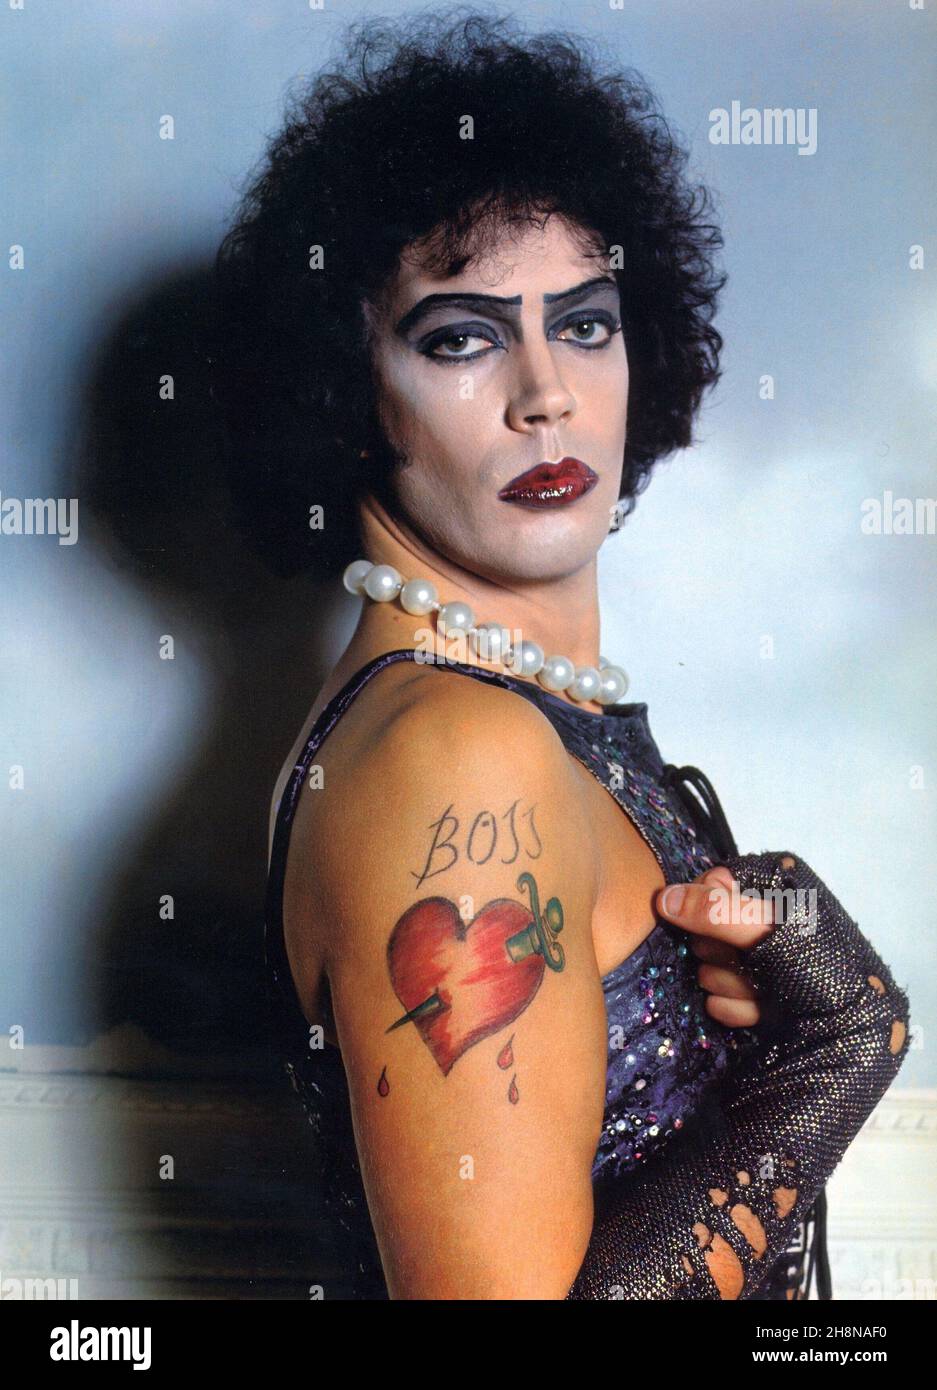 TIM CURRY in THE ROCKY HORROR PICTURE SHOW (1975), directed by JIM SHARMAN. Credit: 20TH CENTURY FOX / Album Stock Photo